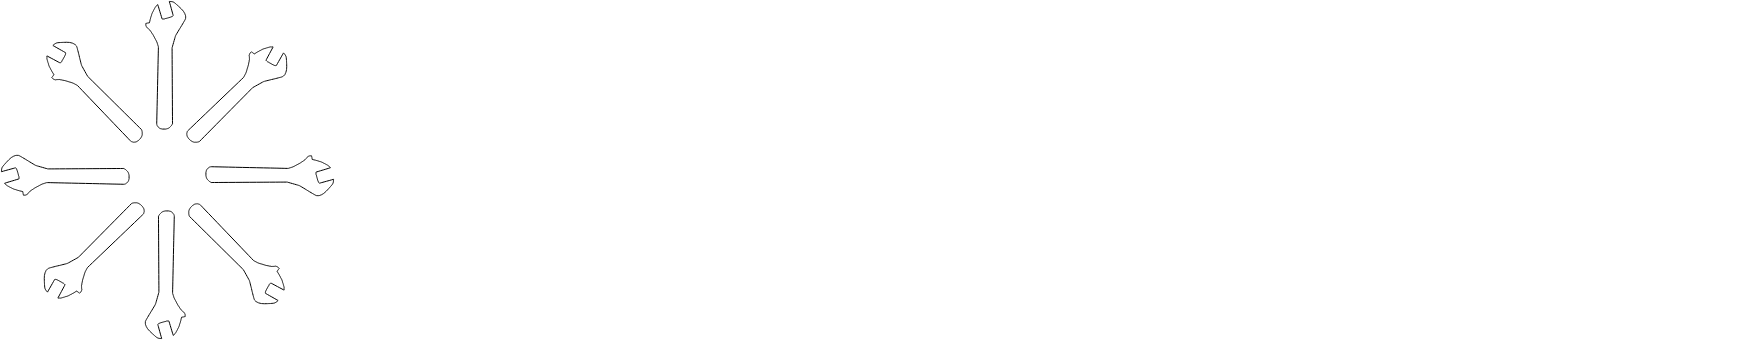 openwrench